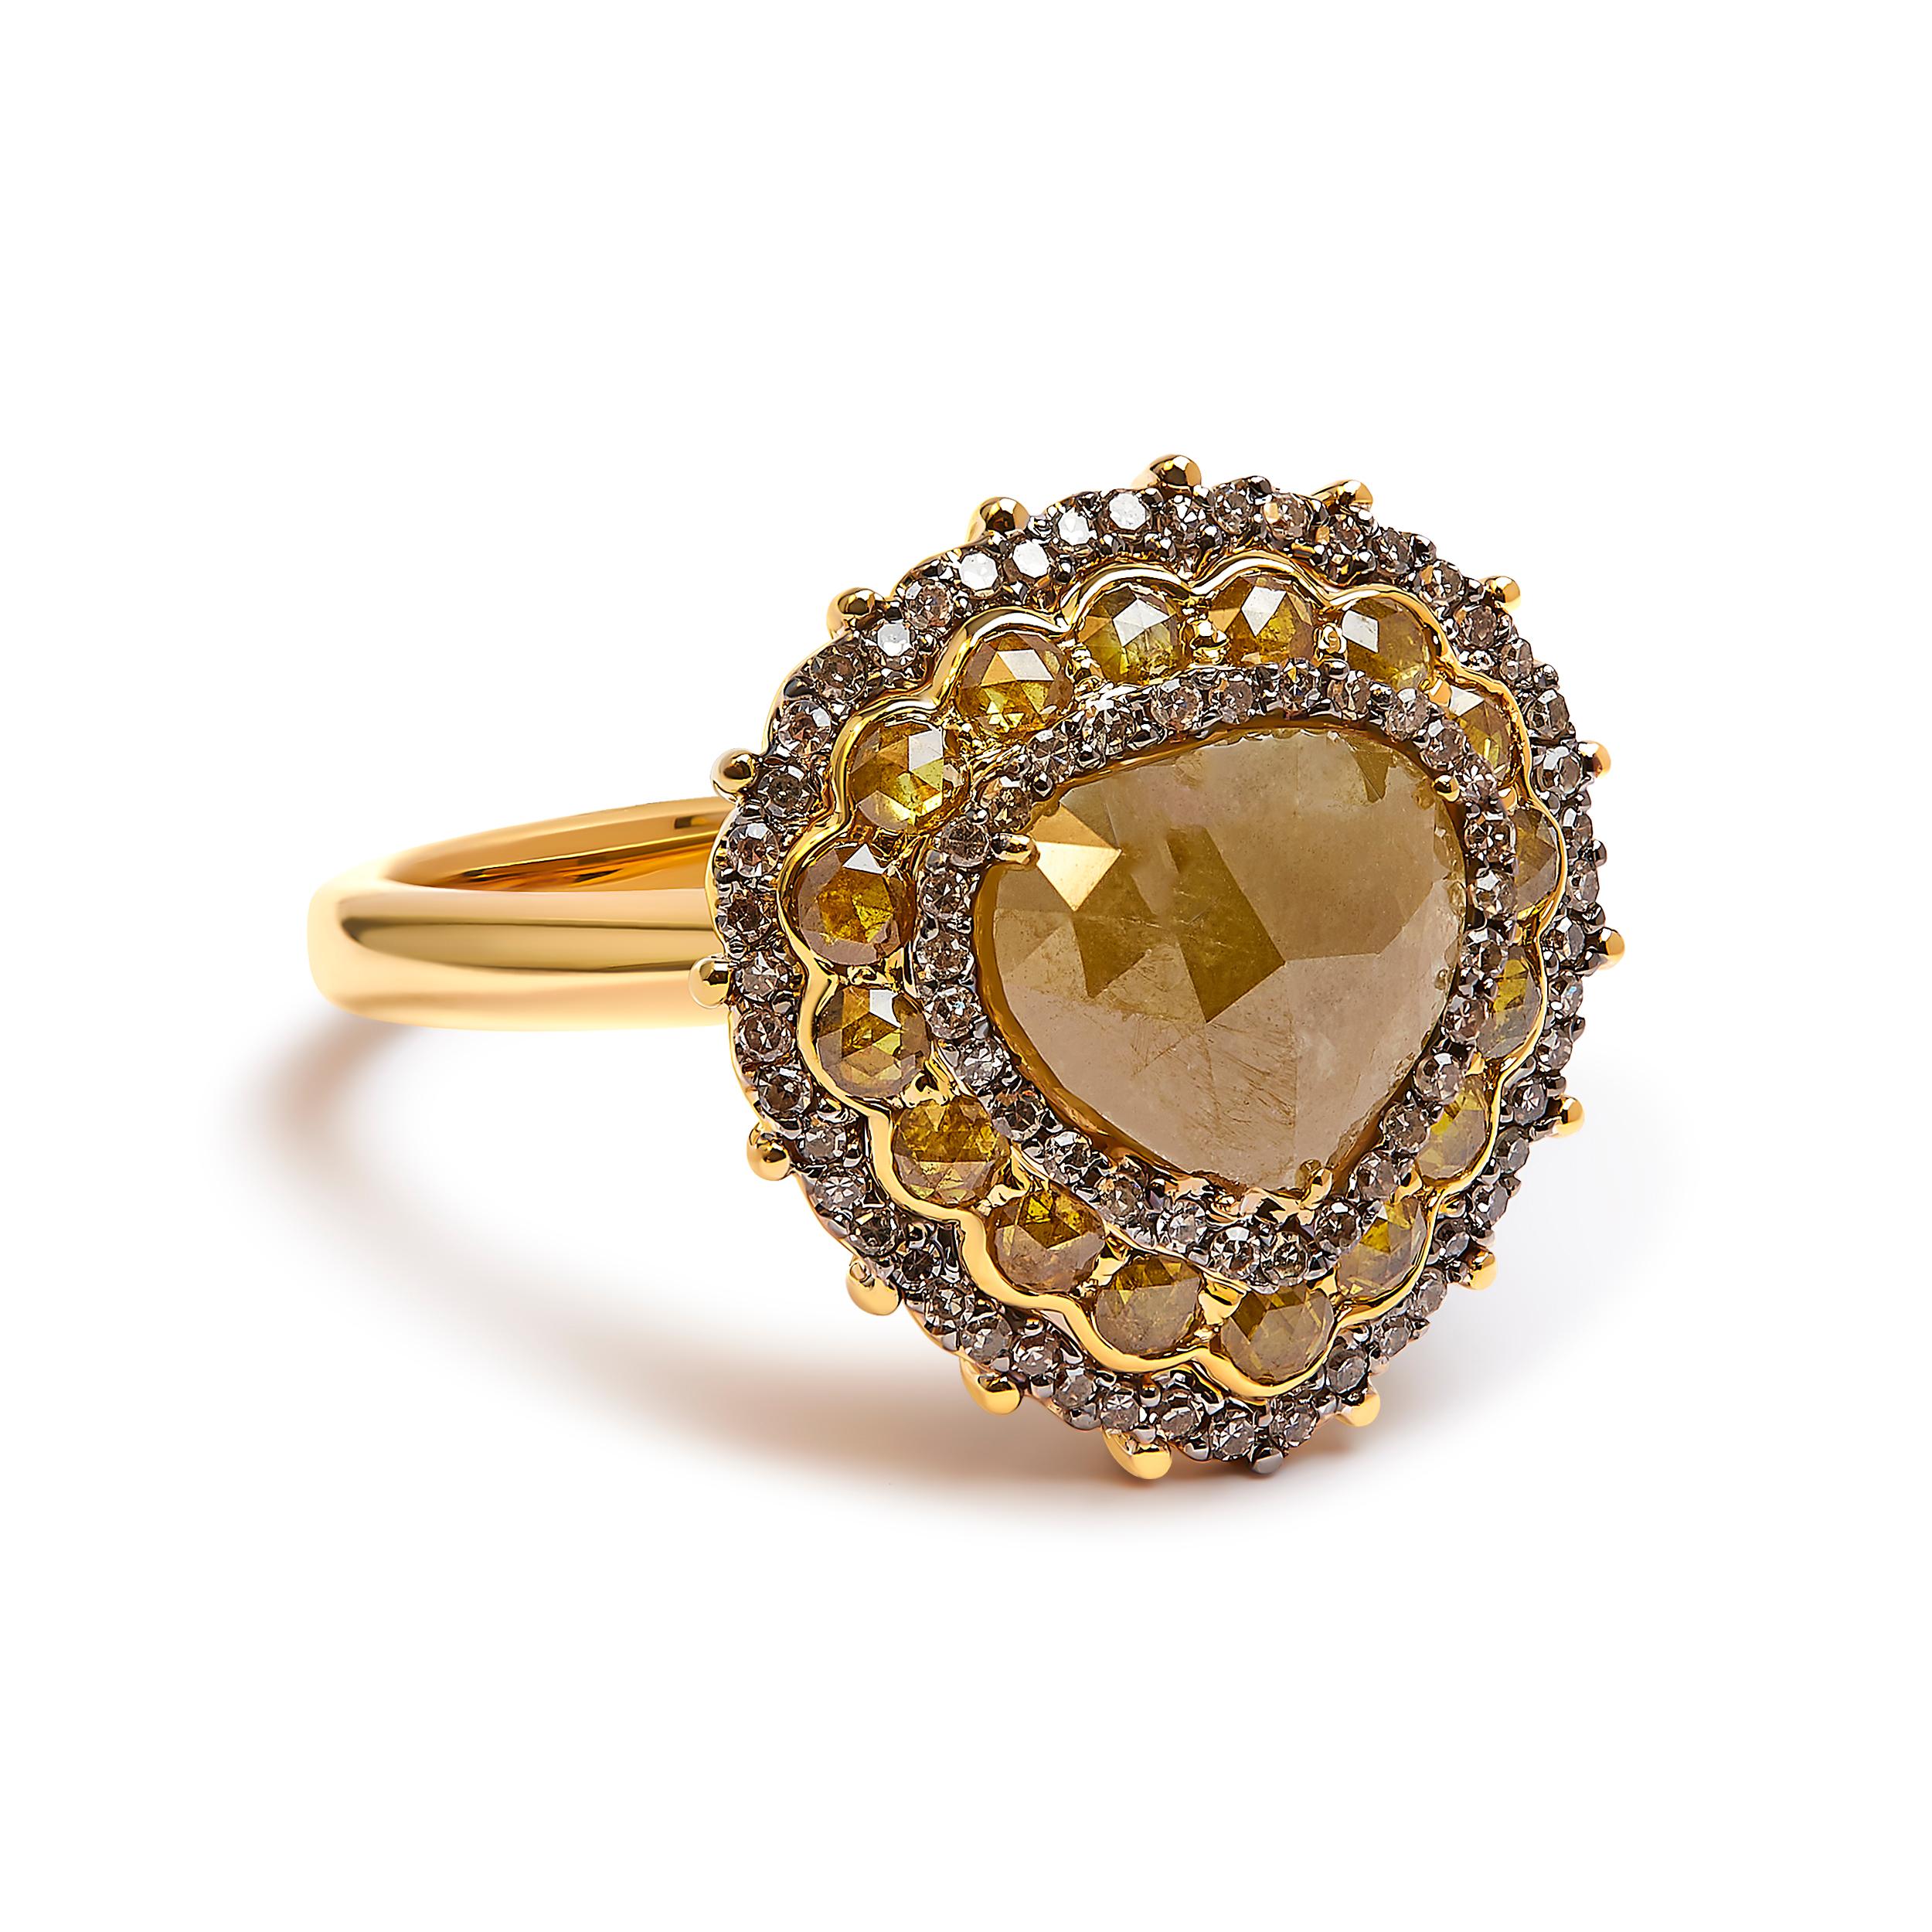 Indulge in the captivating allure of our 14K Yellow Gold Cocktail Ring. Adorned with a stunning array of 94 natural diamonds, this exquisite piece boasts a total weight of 3.0 cttw. The yellow rose cut diamonds, beautifully complemented by white